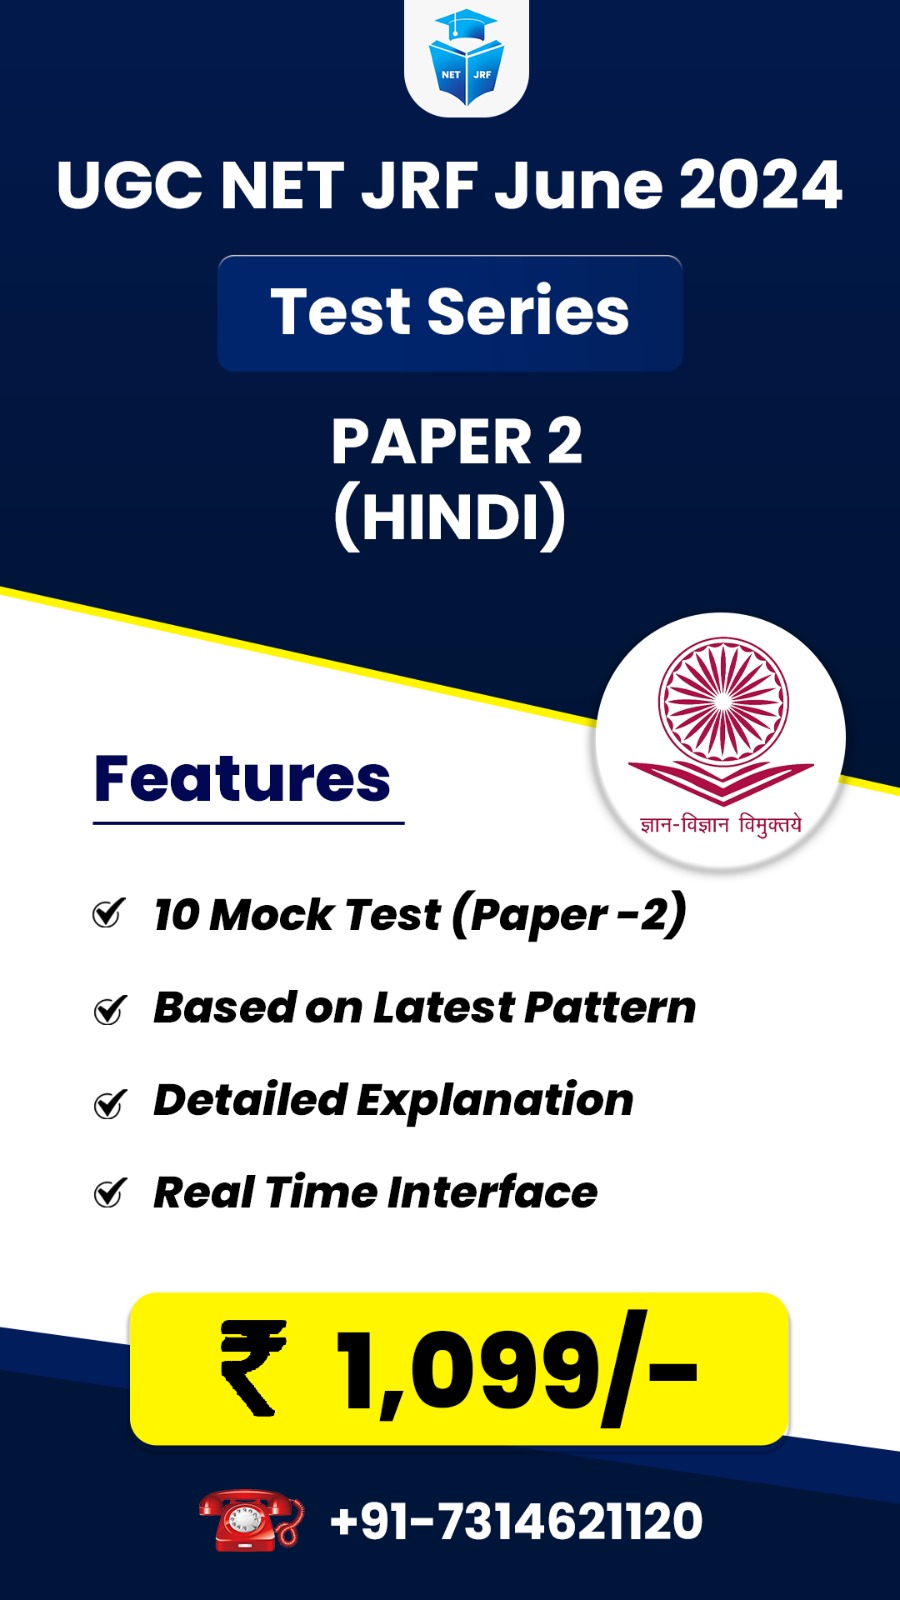 Hindi (Paper 2) Test Series for June 2024